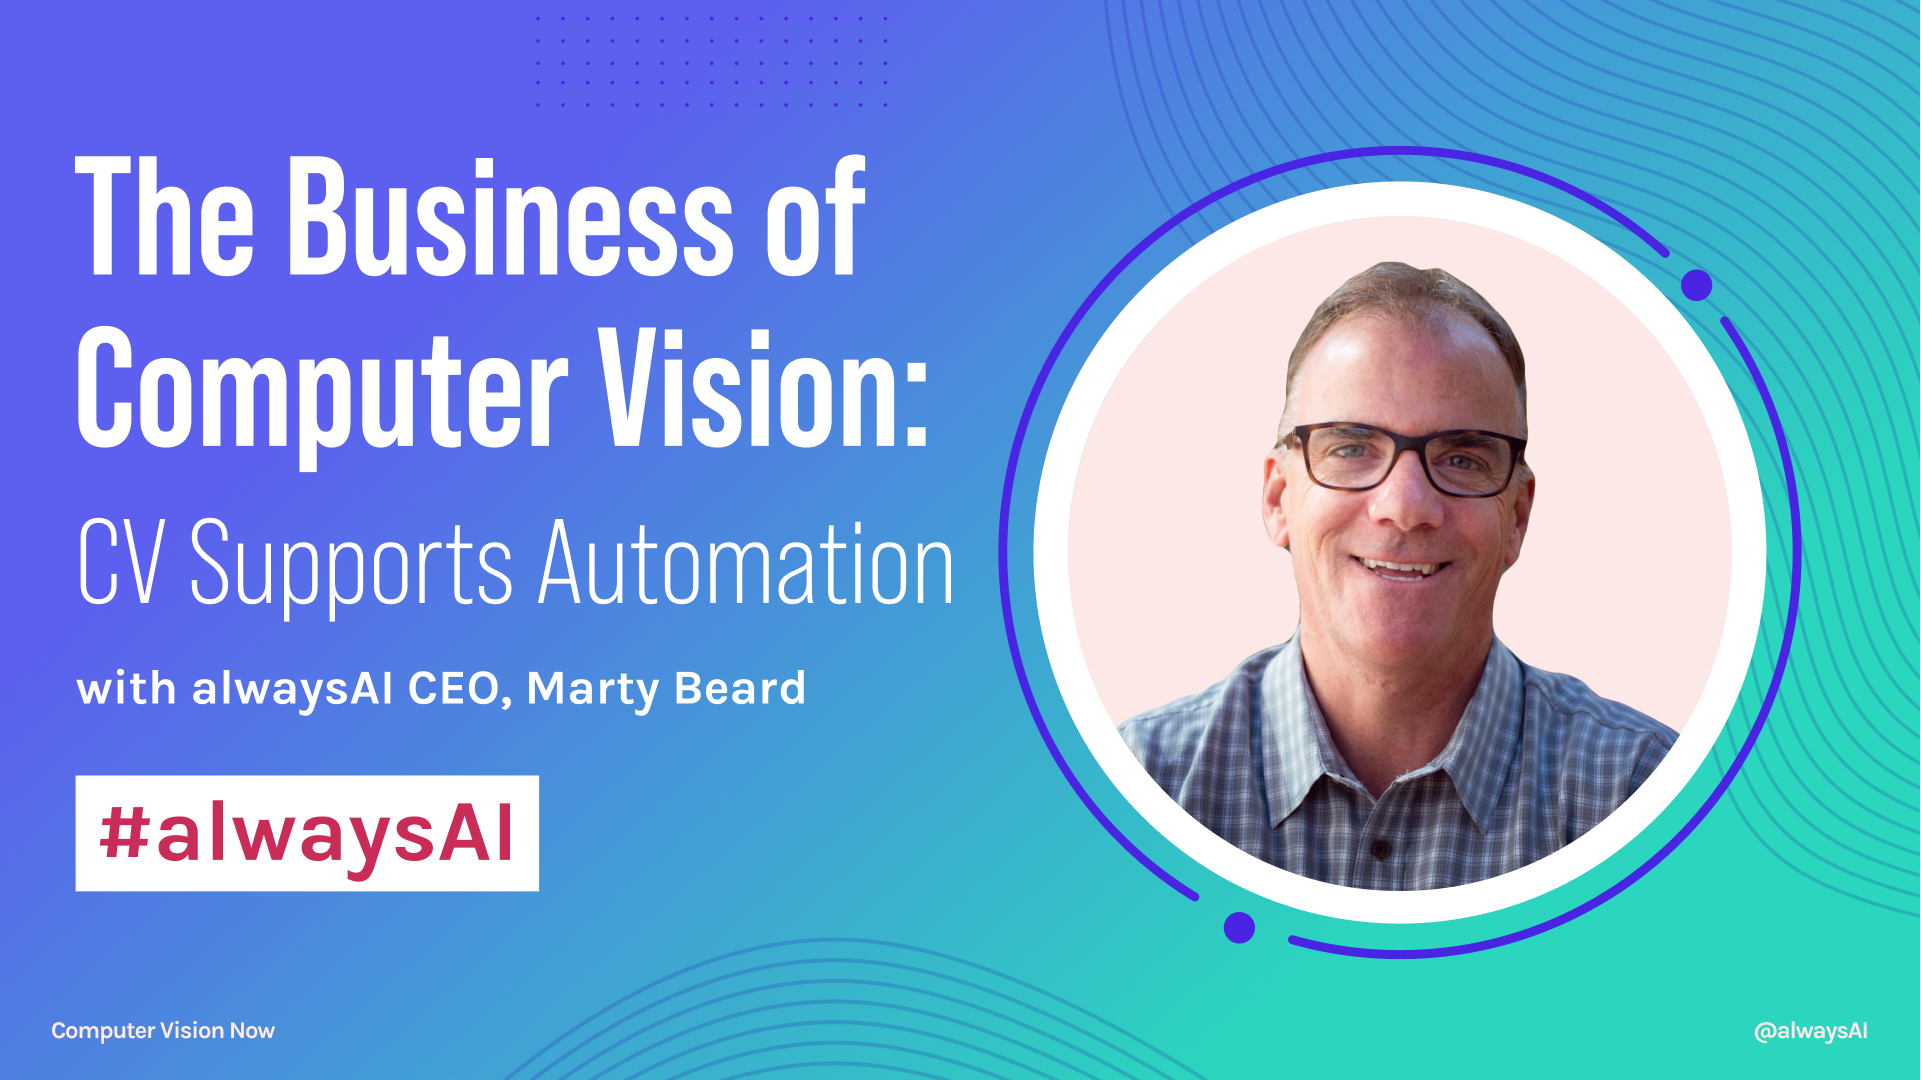 Learn how computer vision empowers businesses to improve their business operations, protect their assets and employees, and drive their top-line revenues! 